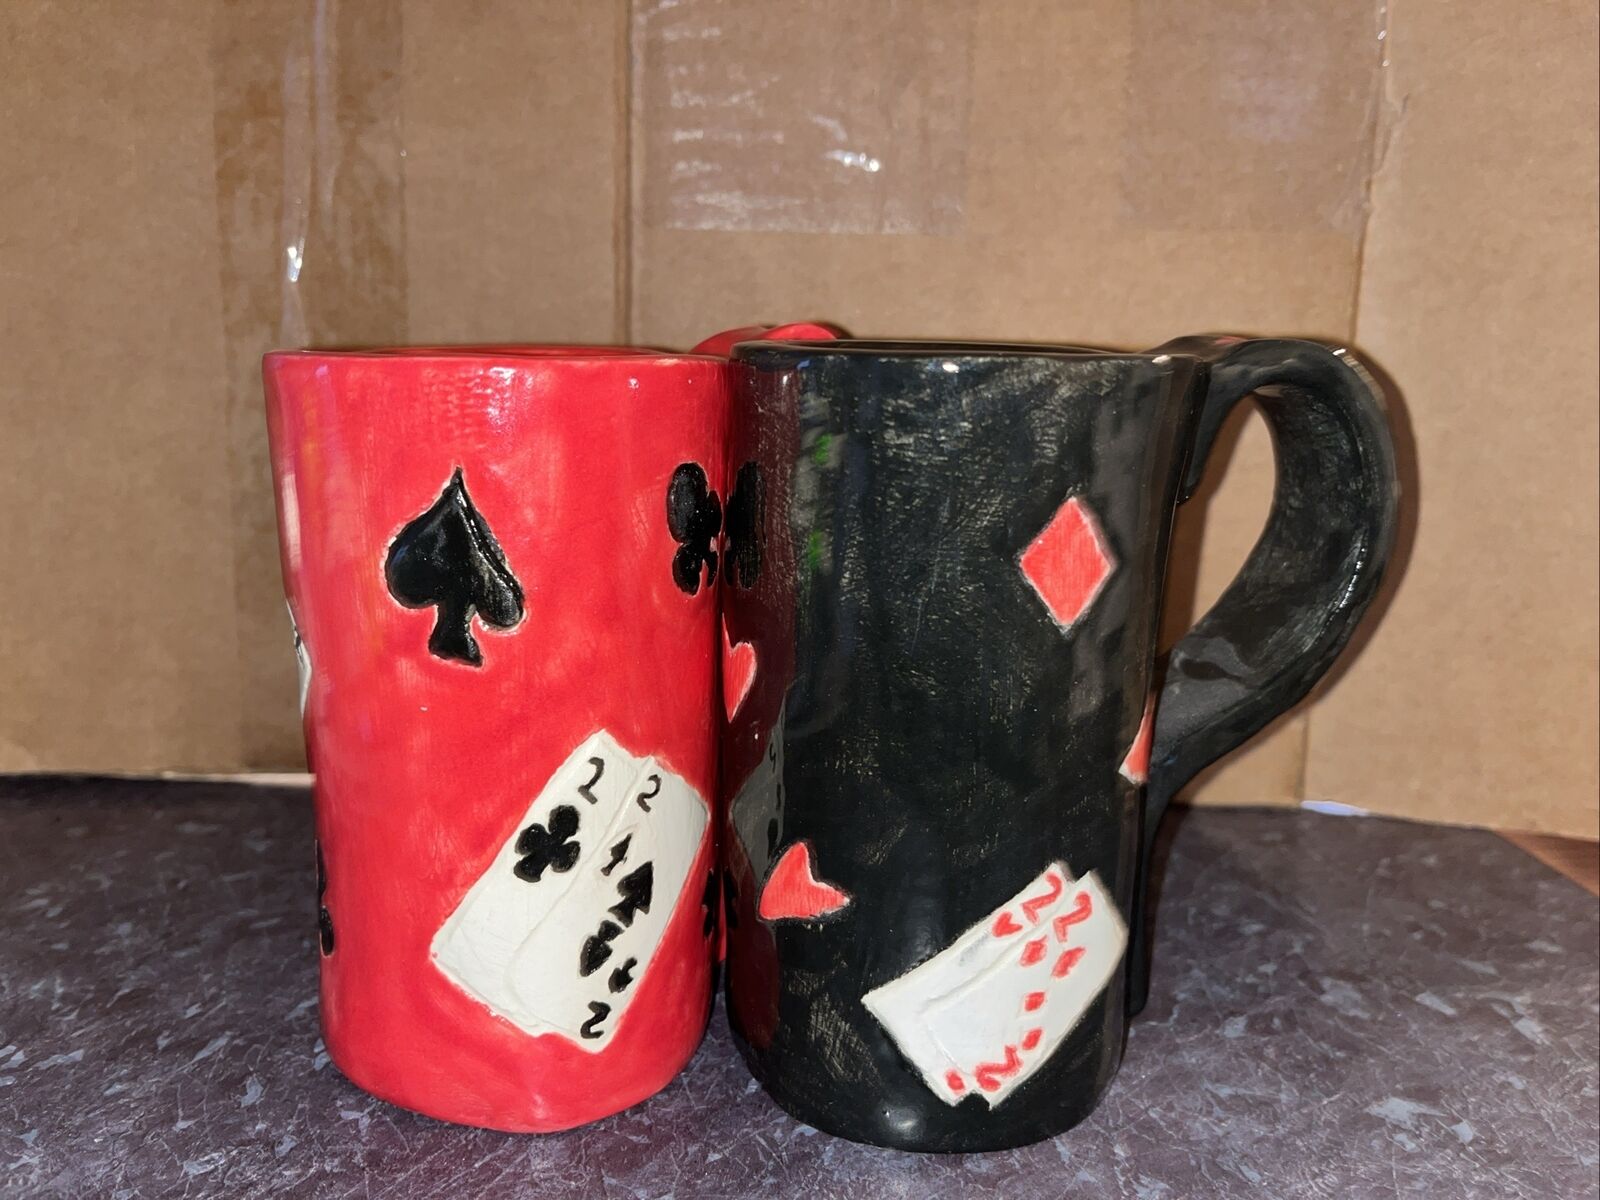 Handmade and painted poker mugs - 2 pc set - Inverted colors and suits